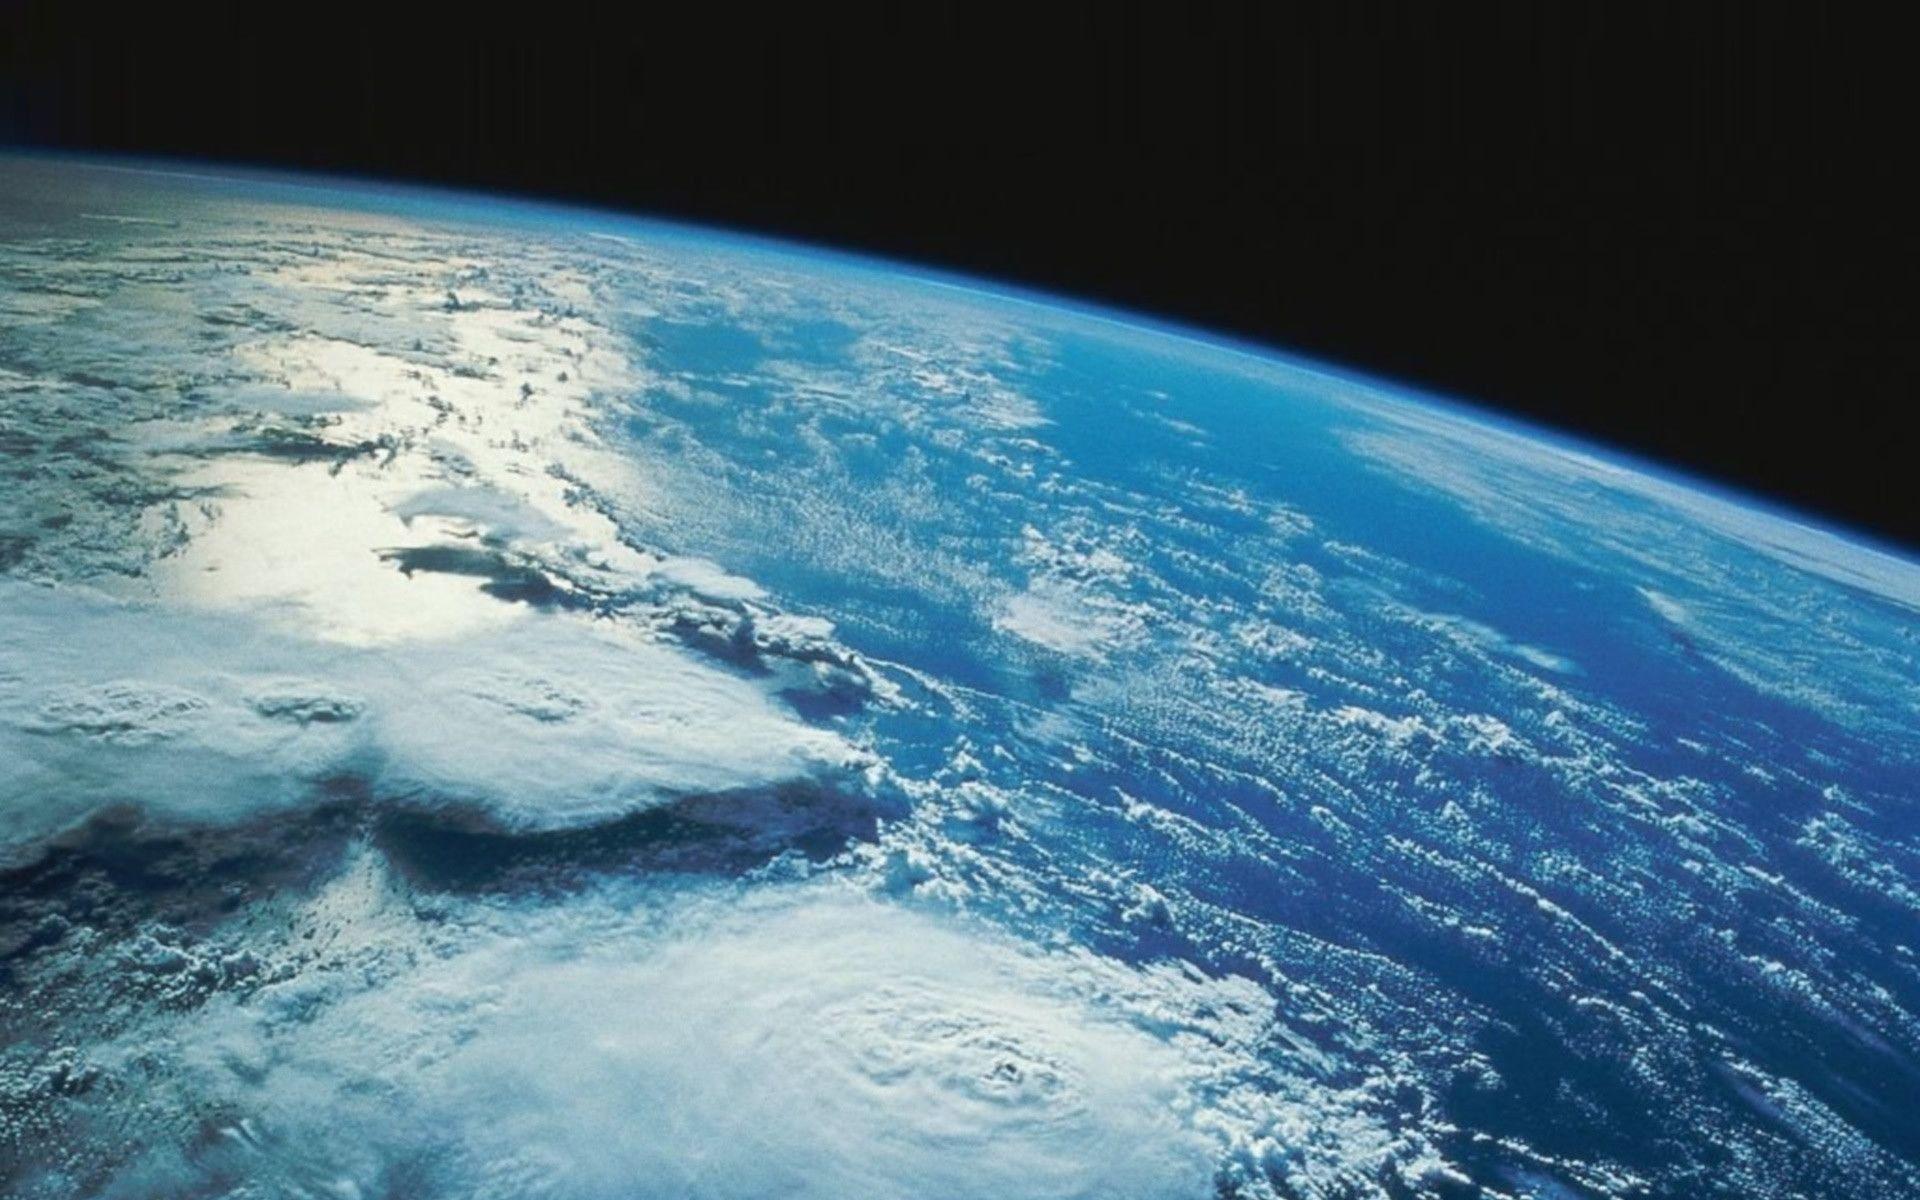 Earth From Space Wallpapers 1920X1200 27422 Hd Wallpapers in Space